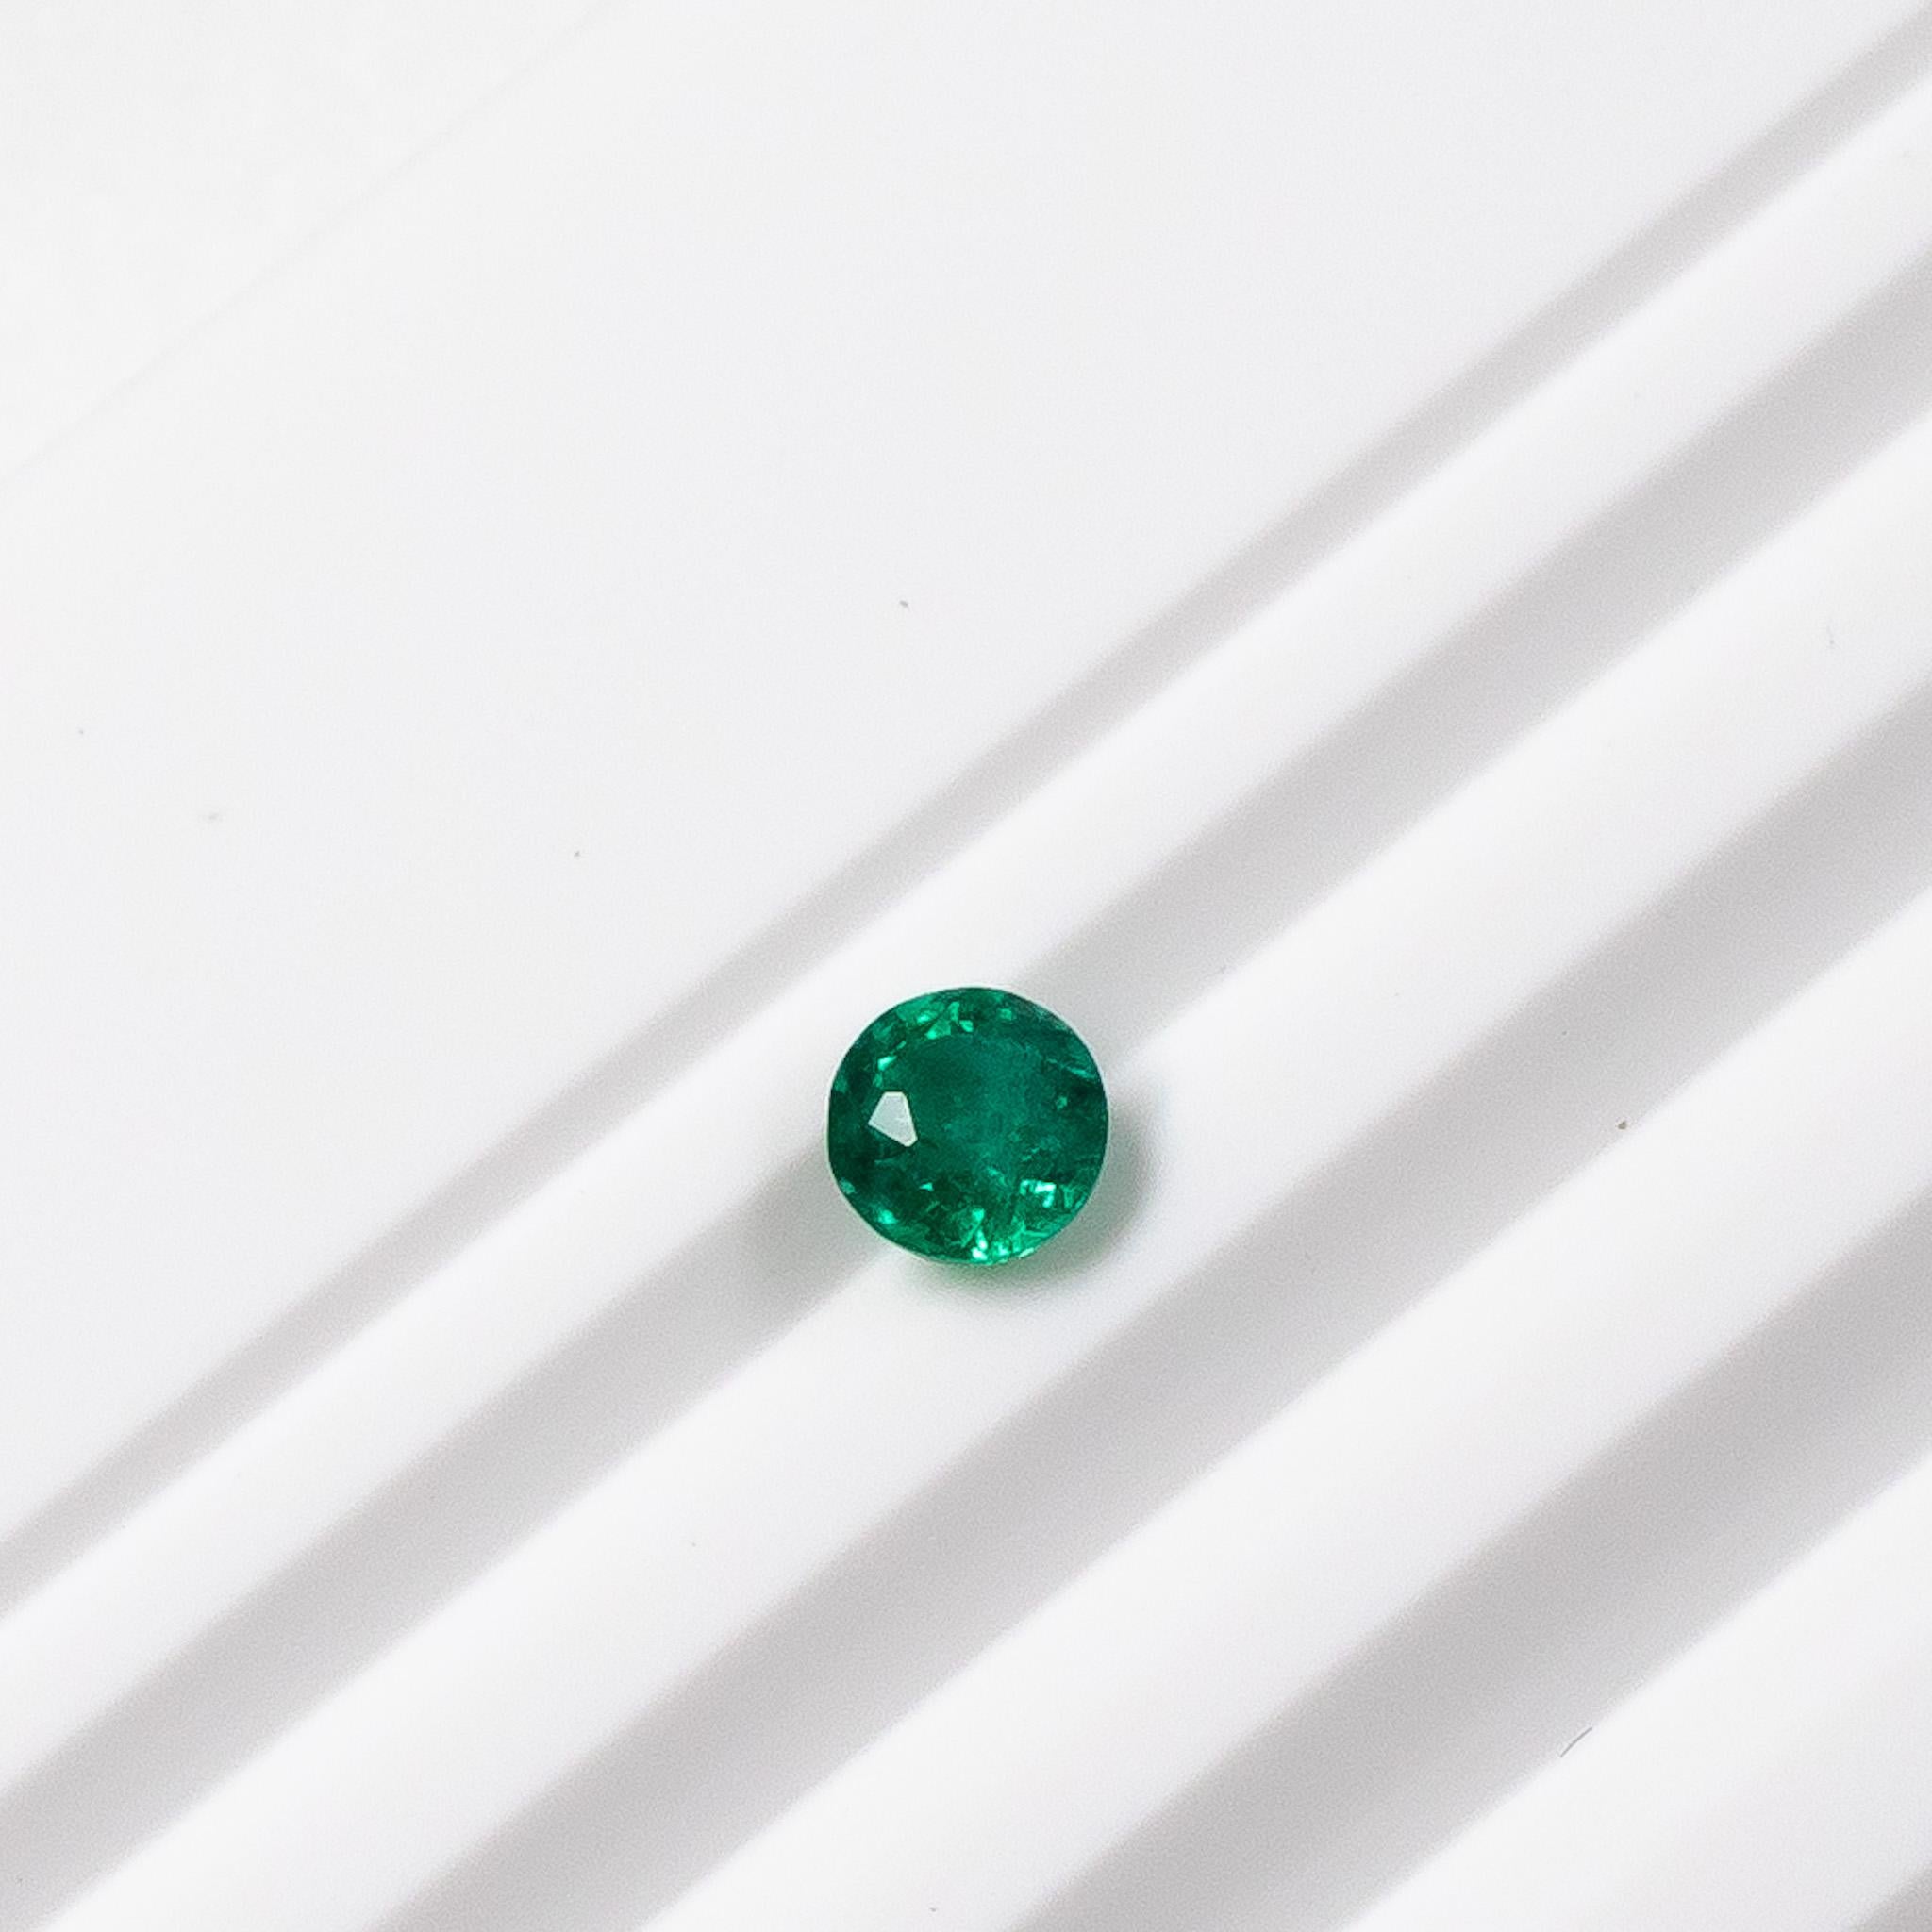 Beautiful round green emerald stud earring set in Platinum. 

The natural Zambian green emerald is a stunning medium blue-green colour. The stud is set in a three prong martini setting with a butterfly push back. Please note you are  purchasing one